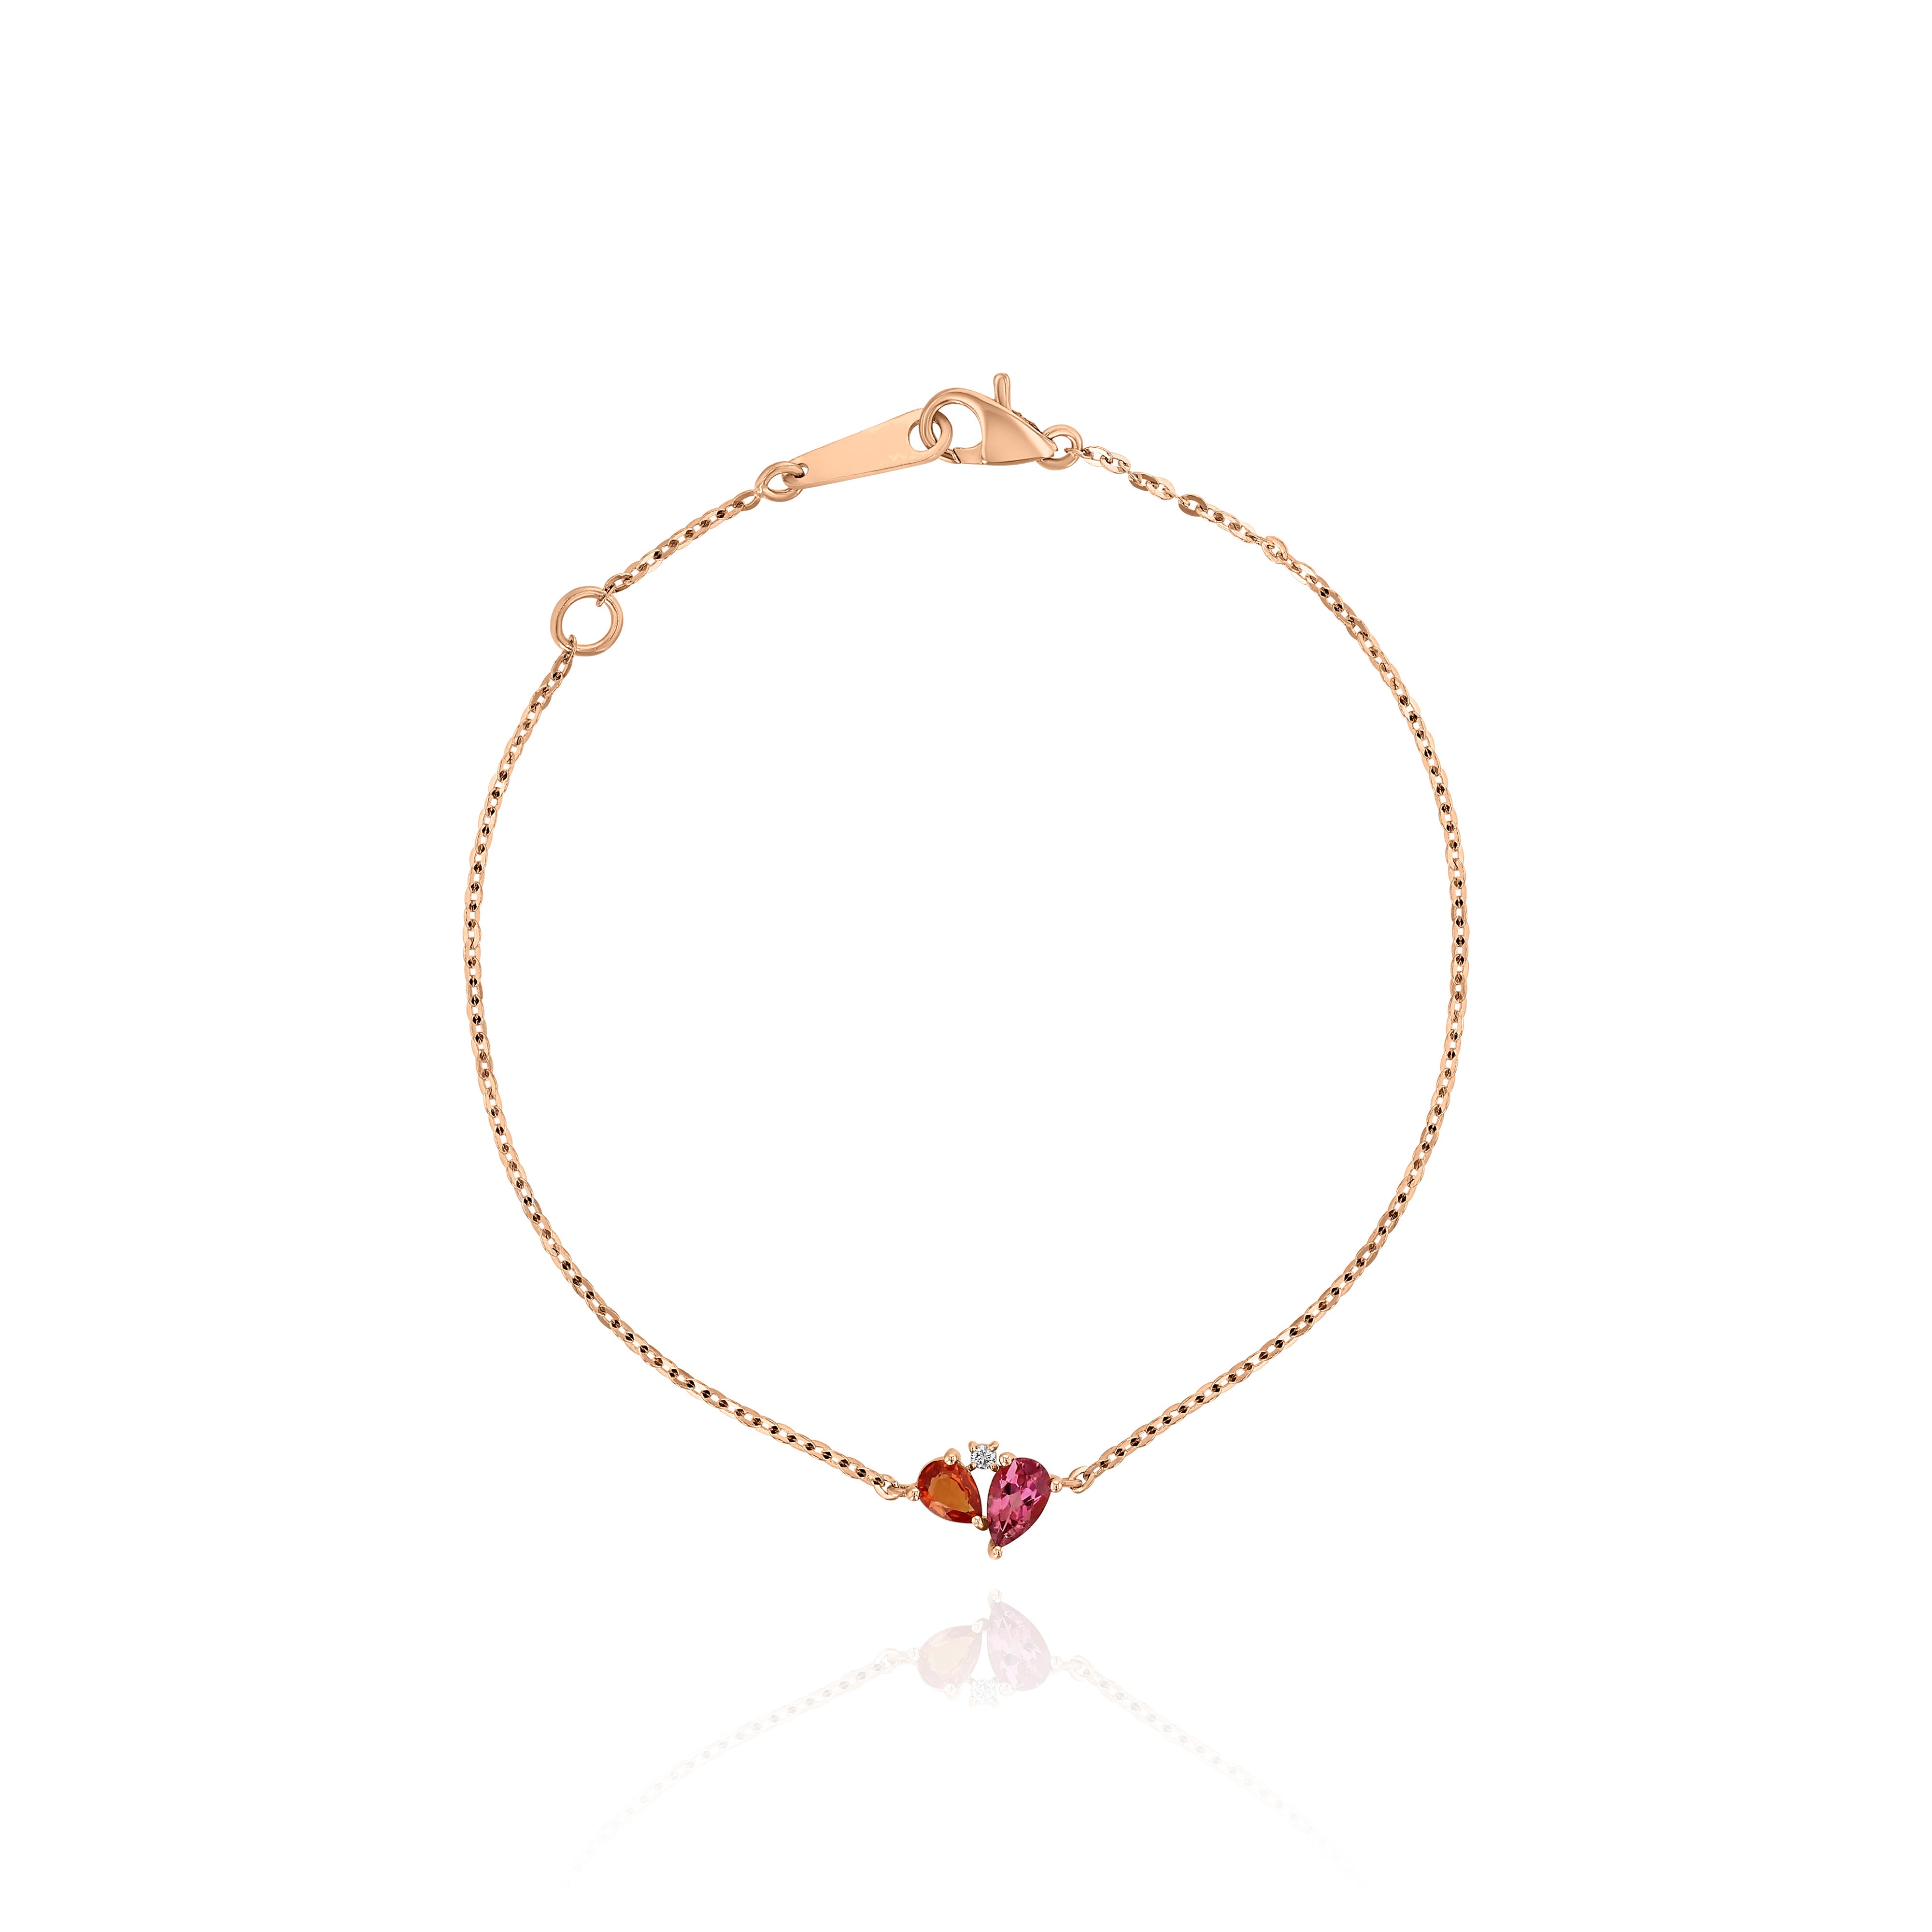 Rose Gold Bracelet with pear shaped Pink Tourmaline and Orange Sapphire, and a round Diamond, Small